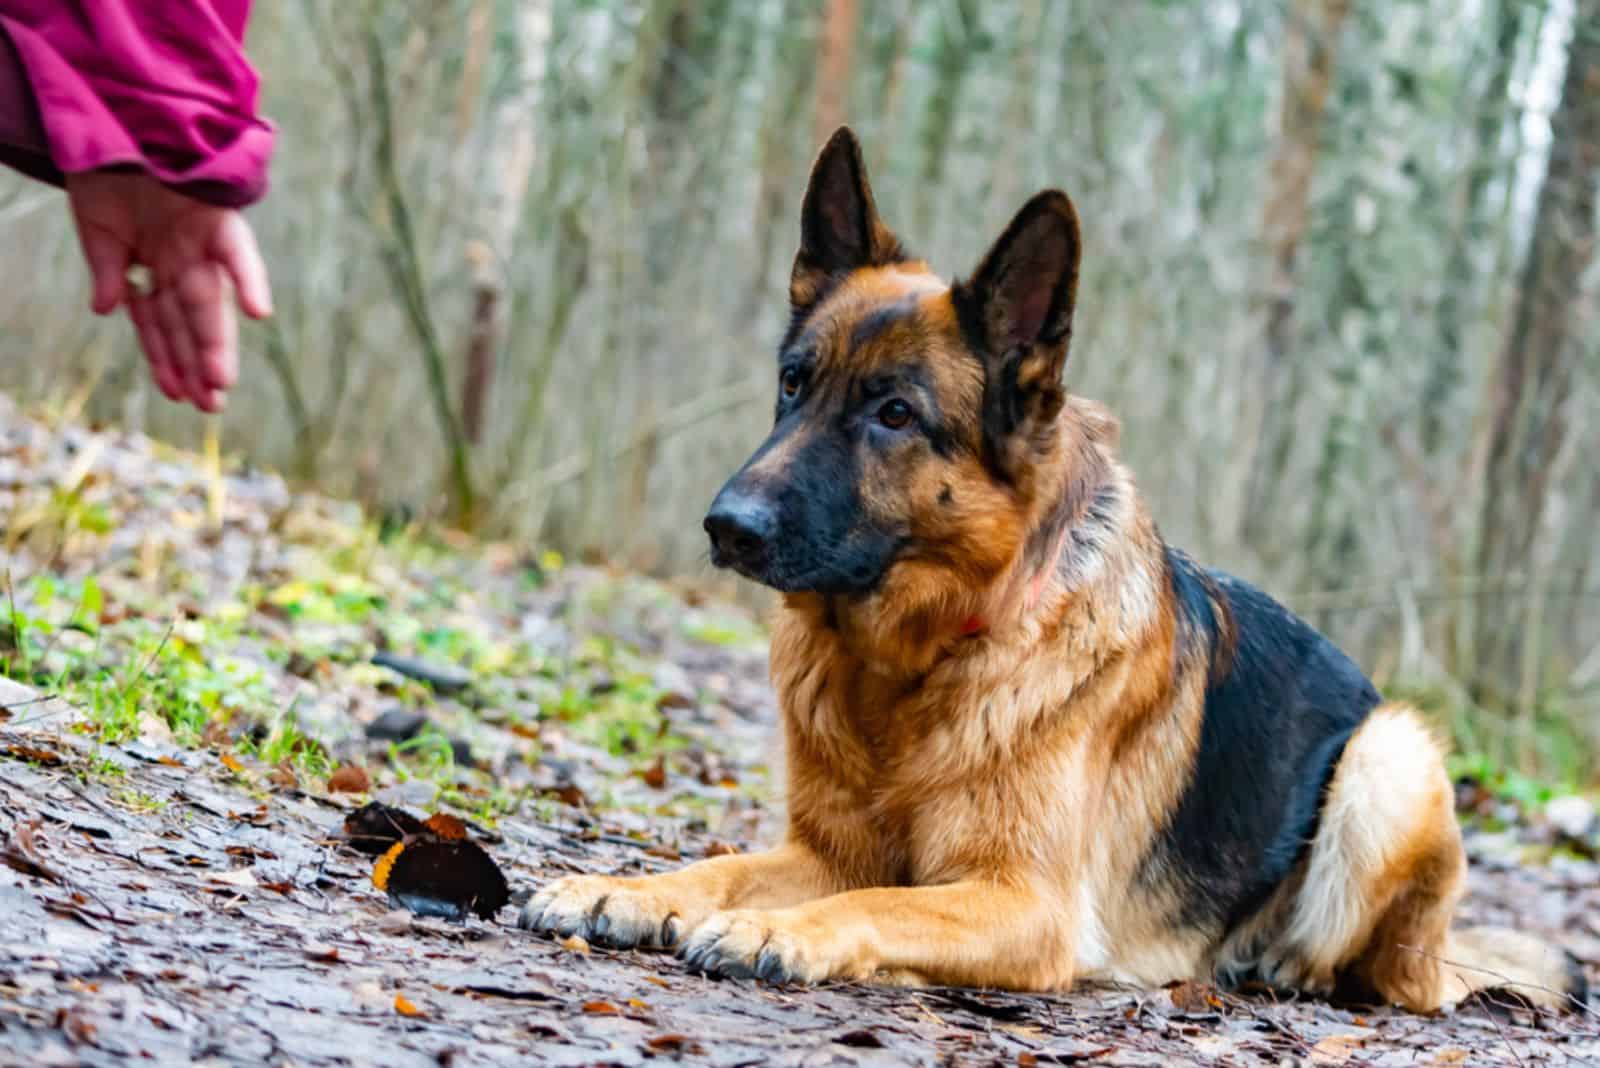 old german shepherd dog lying on the ground and looking at owner's hand